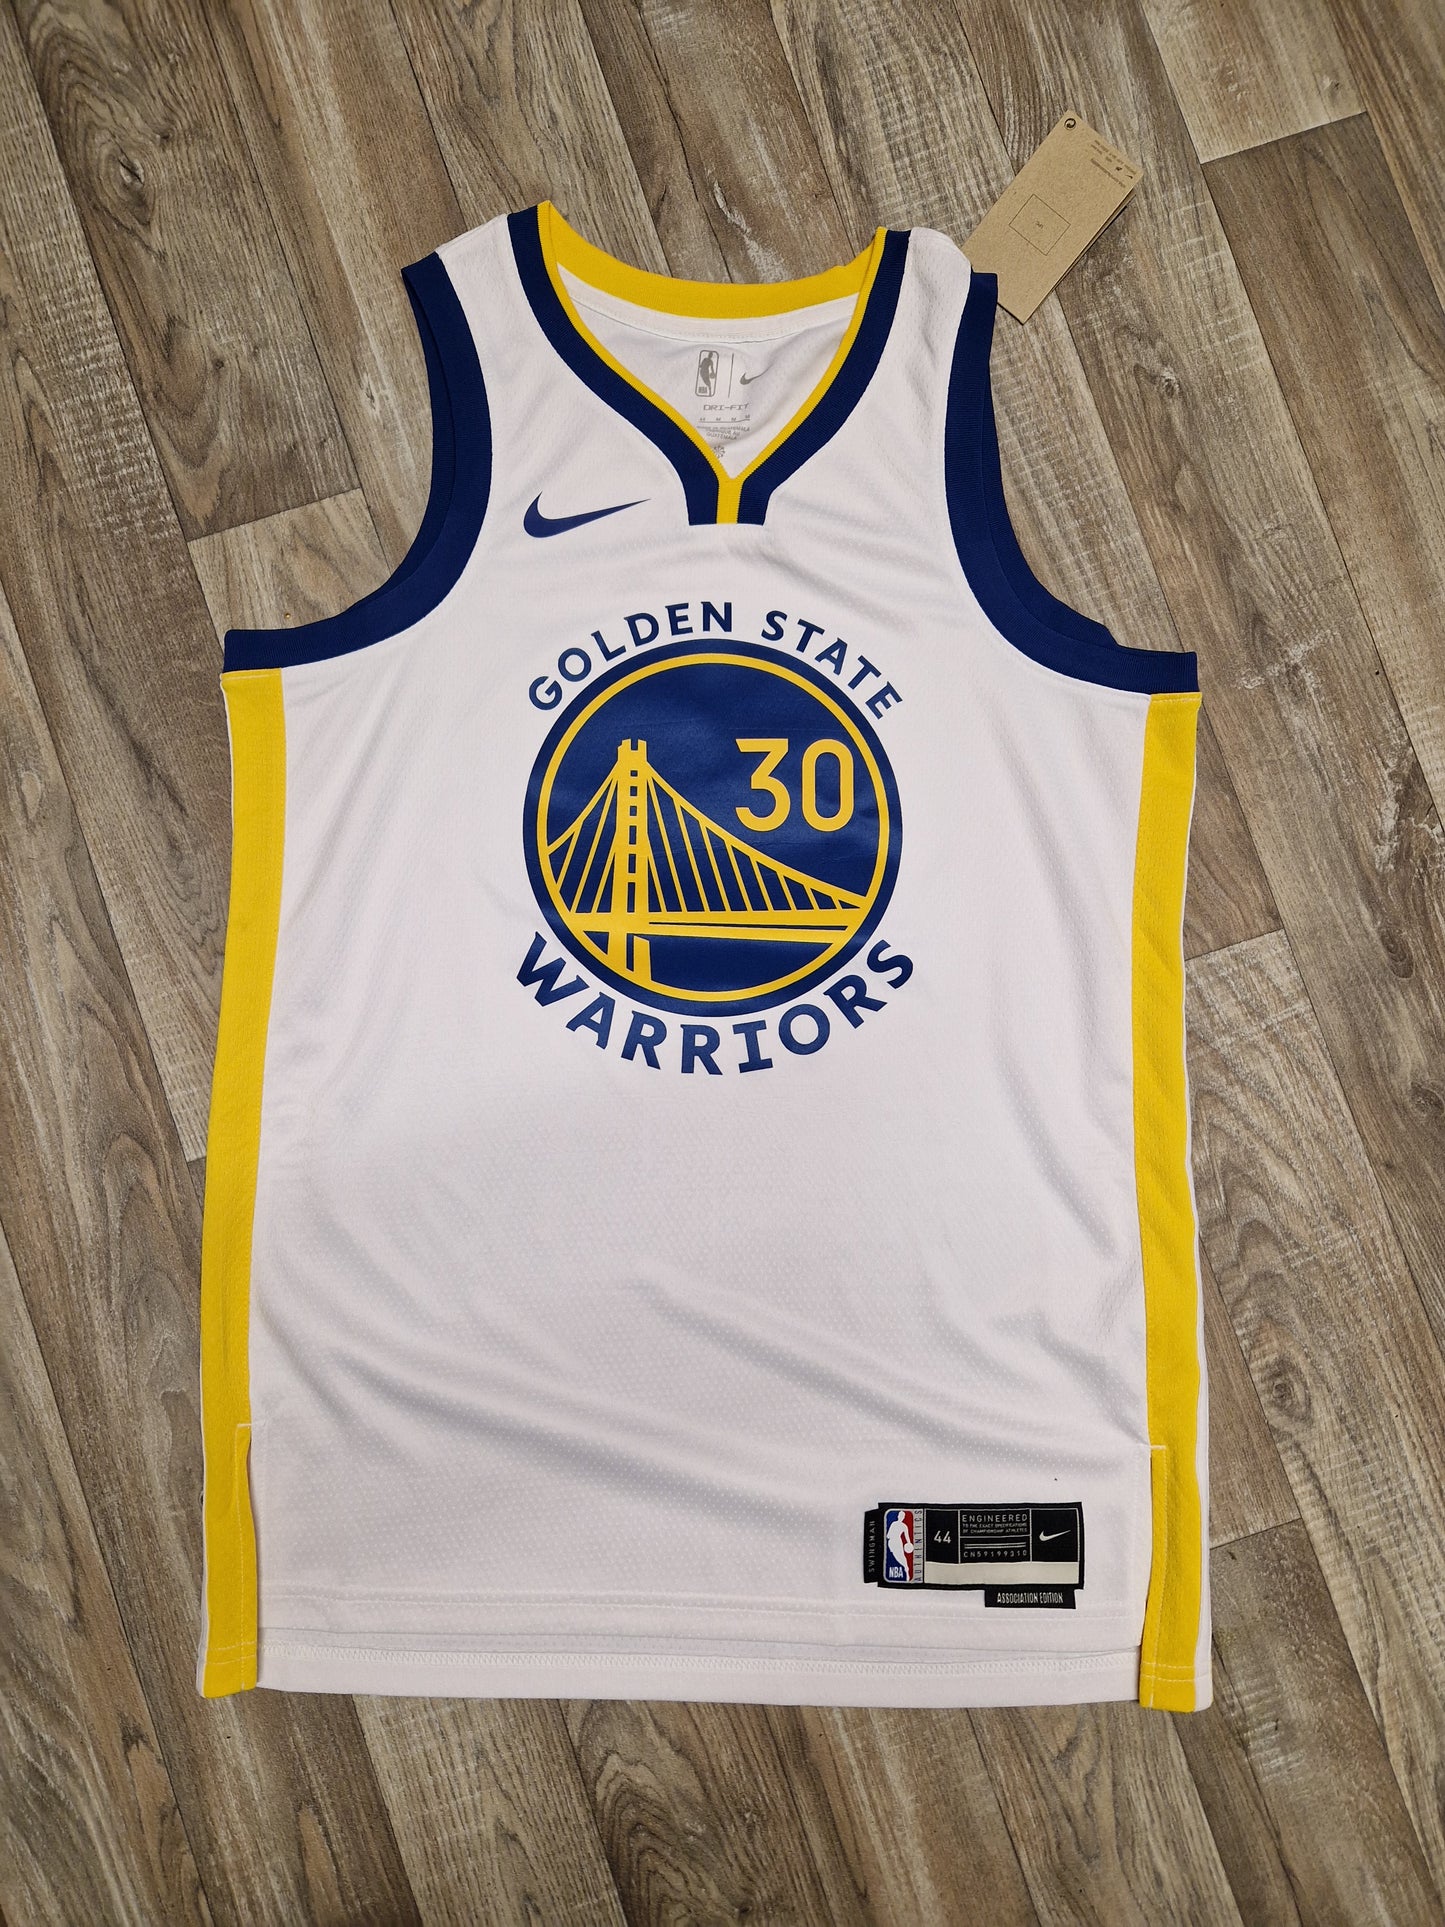 Steph Curry Golden State Warriors Jersey Size XL